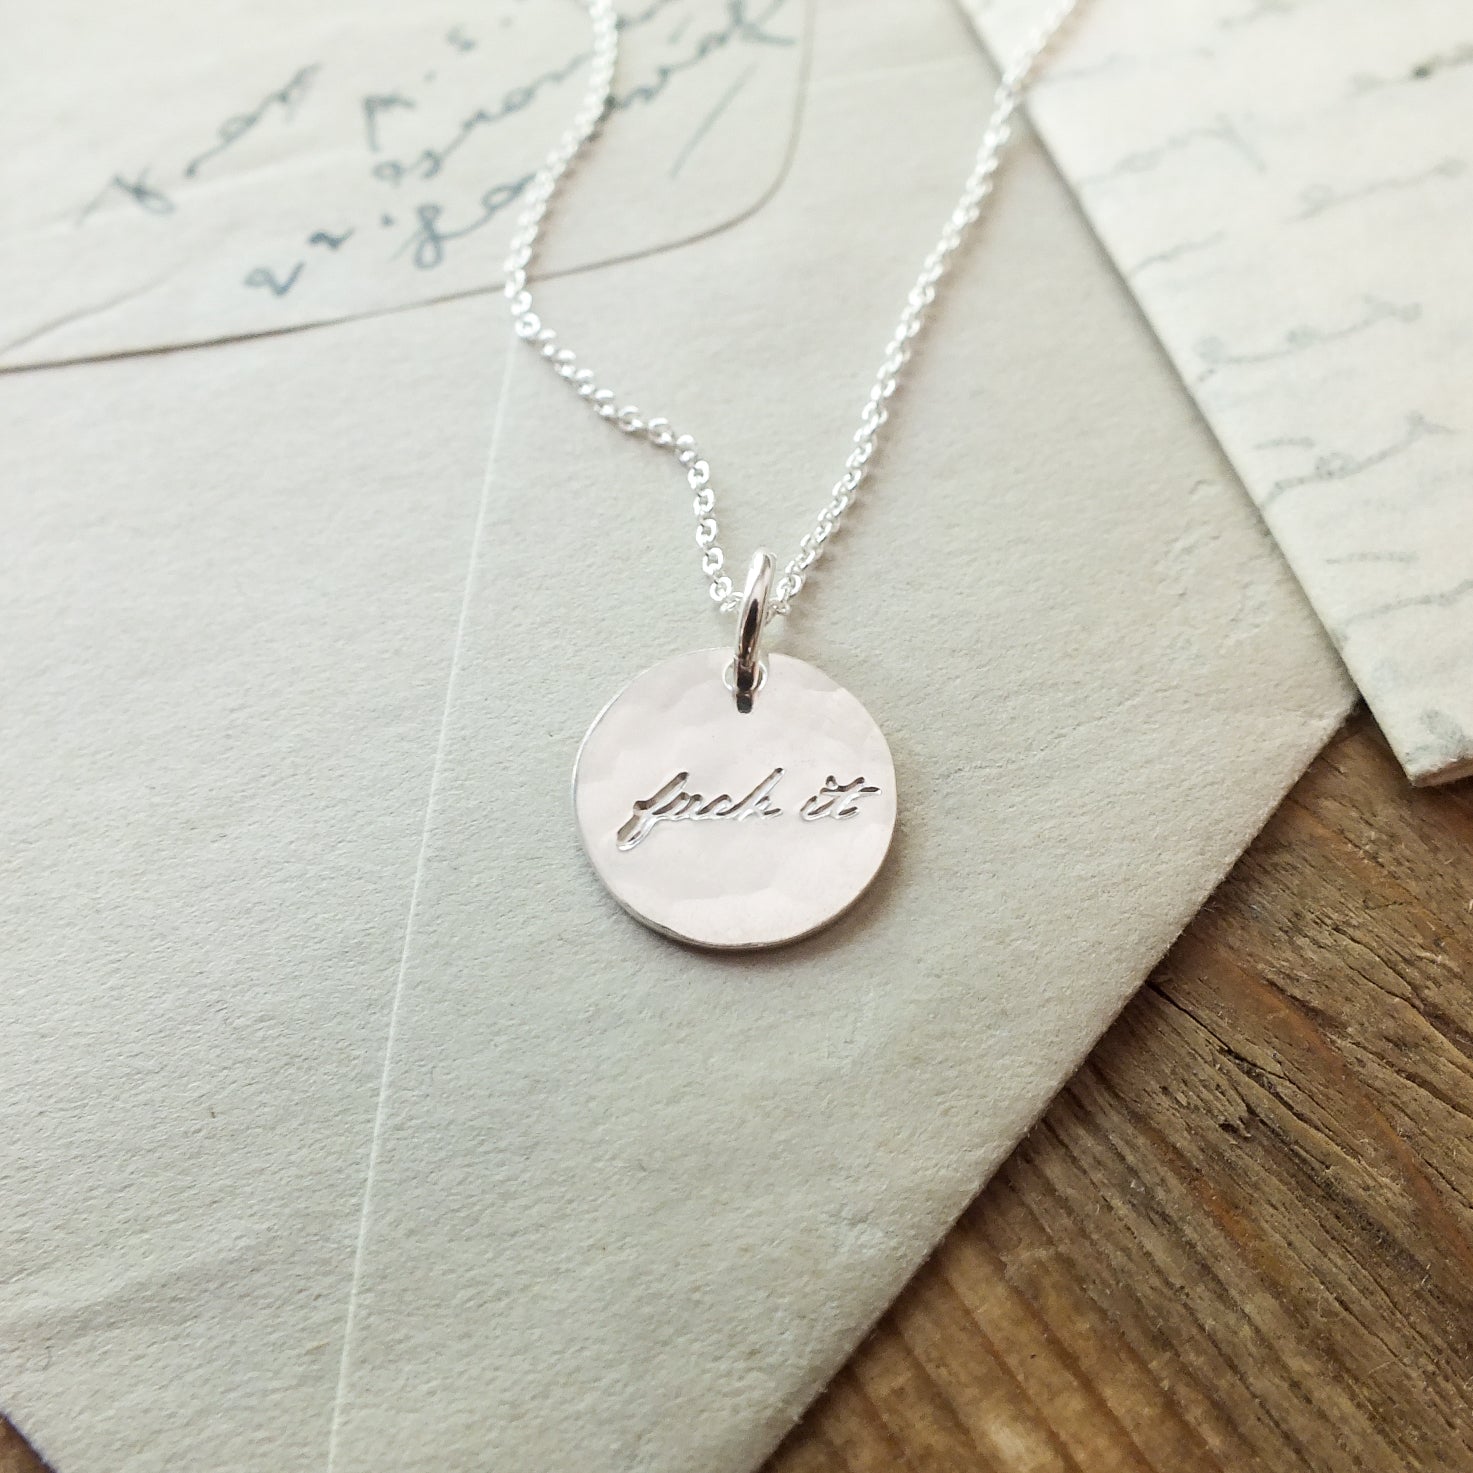 Becoming Jewelry&#39;s Fuck It Necklace with handwritten inscription on wooden background with envelopes.